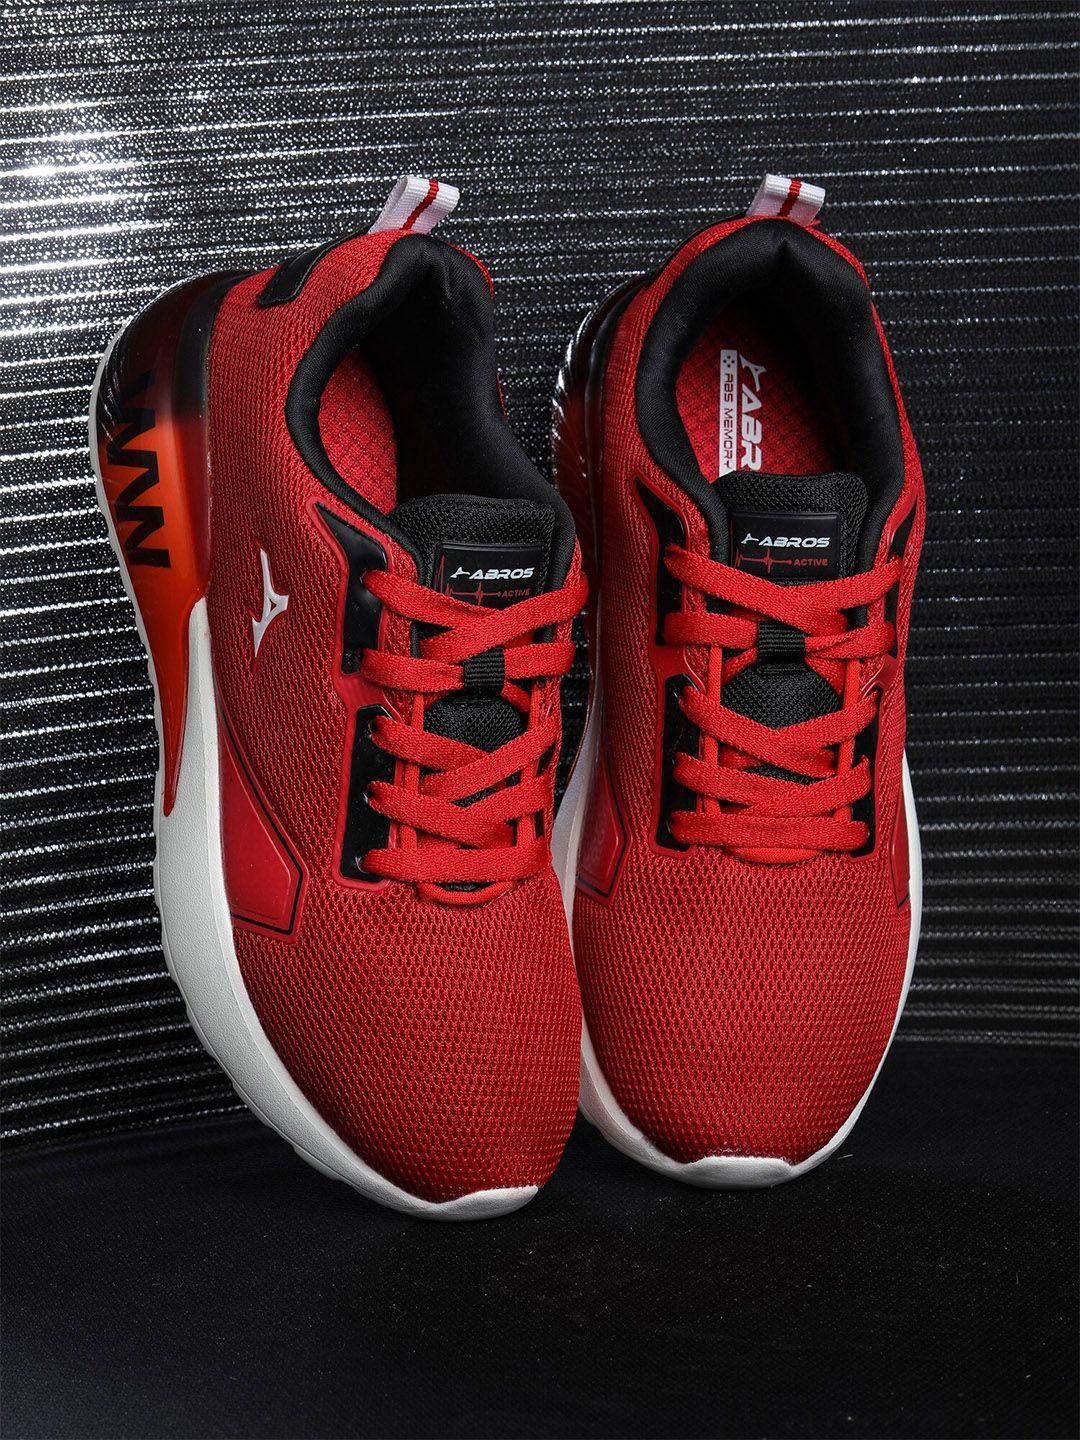 abros boys red mesh running shoes